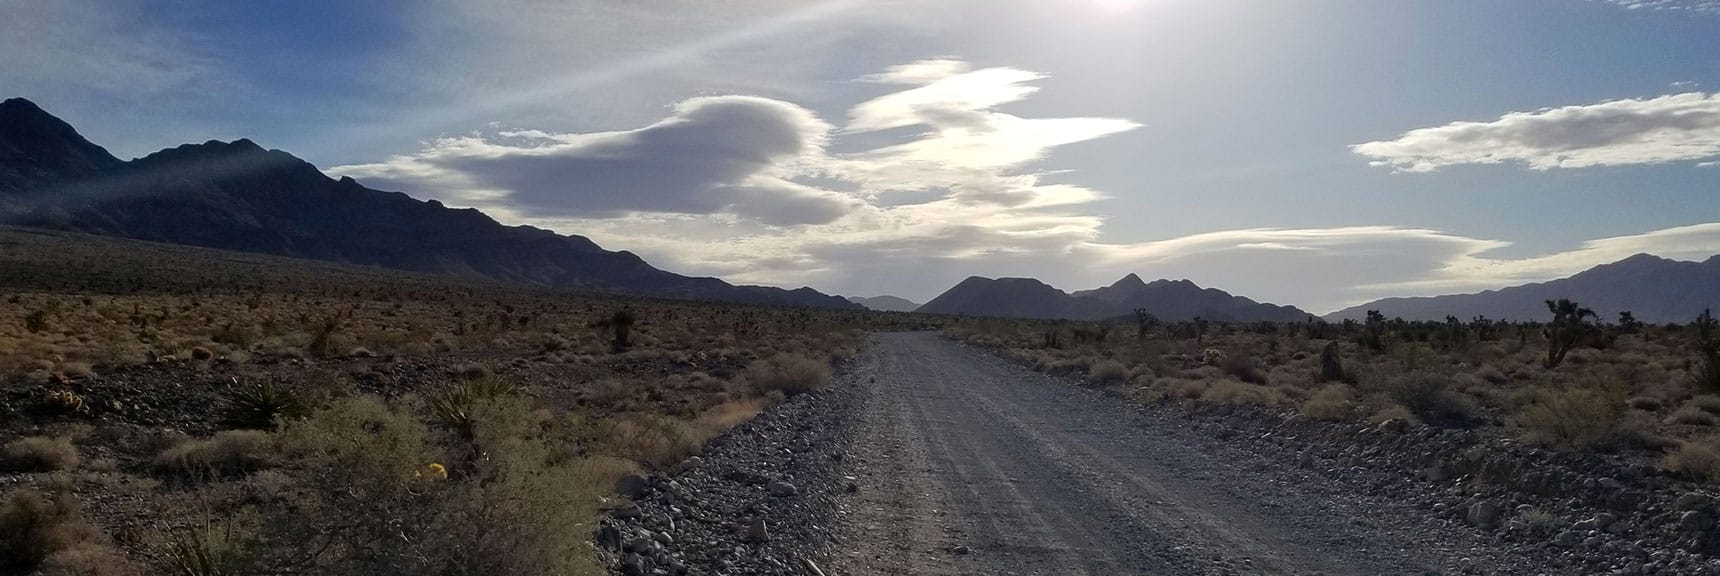 Early Morning View of Mormon Well Road Heading Toward Yucca Gap | Fossil Ridge End to End | Sheep Range | Desert National Wildlife Refuge, Nevada